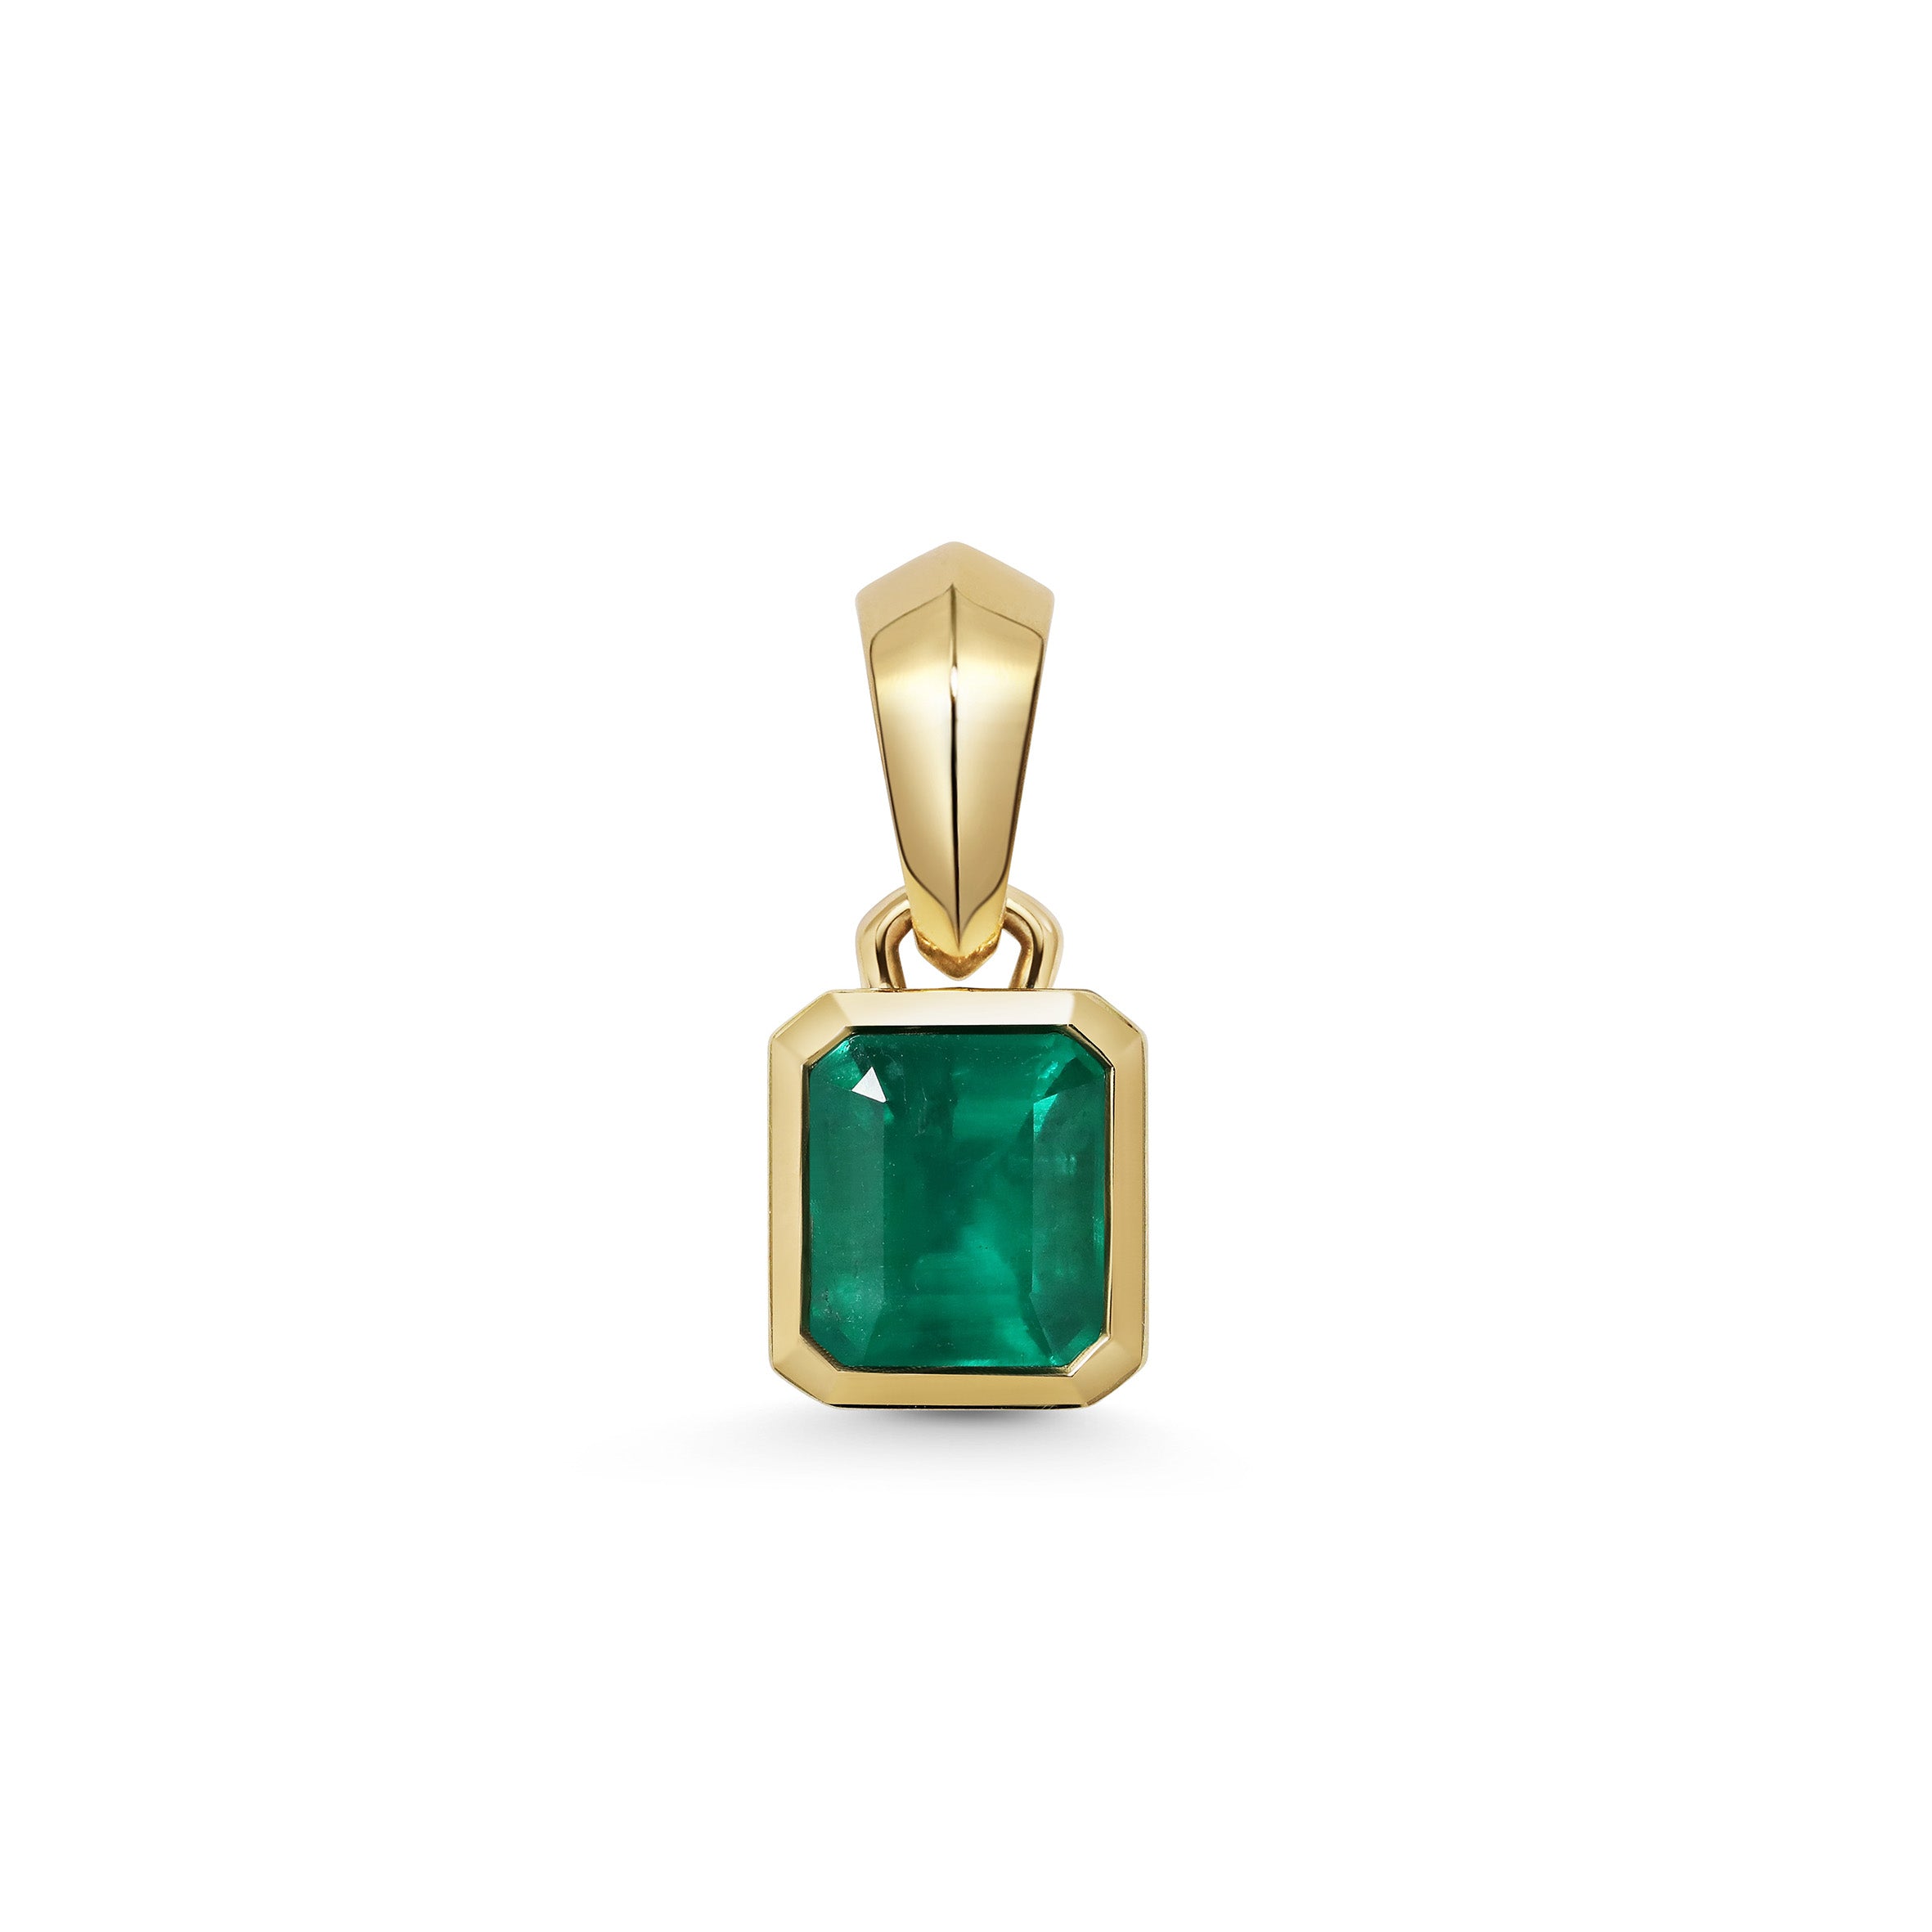 The X - Chunky Charm Pendant - Emerald 2.42ct by East London jeweller Rachel Boston | Discover our collections of unique and timeless engagement rings, wedding rings, and modern fine jewellery.